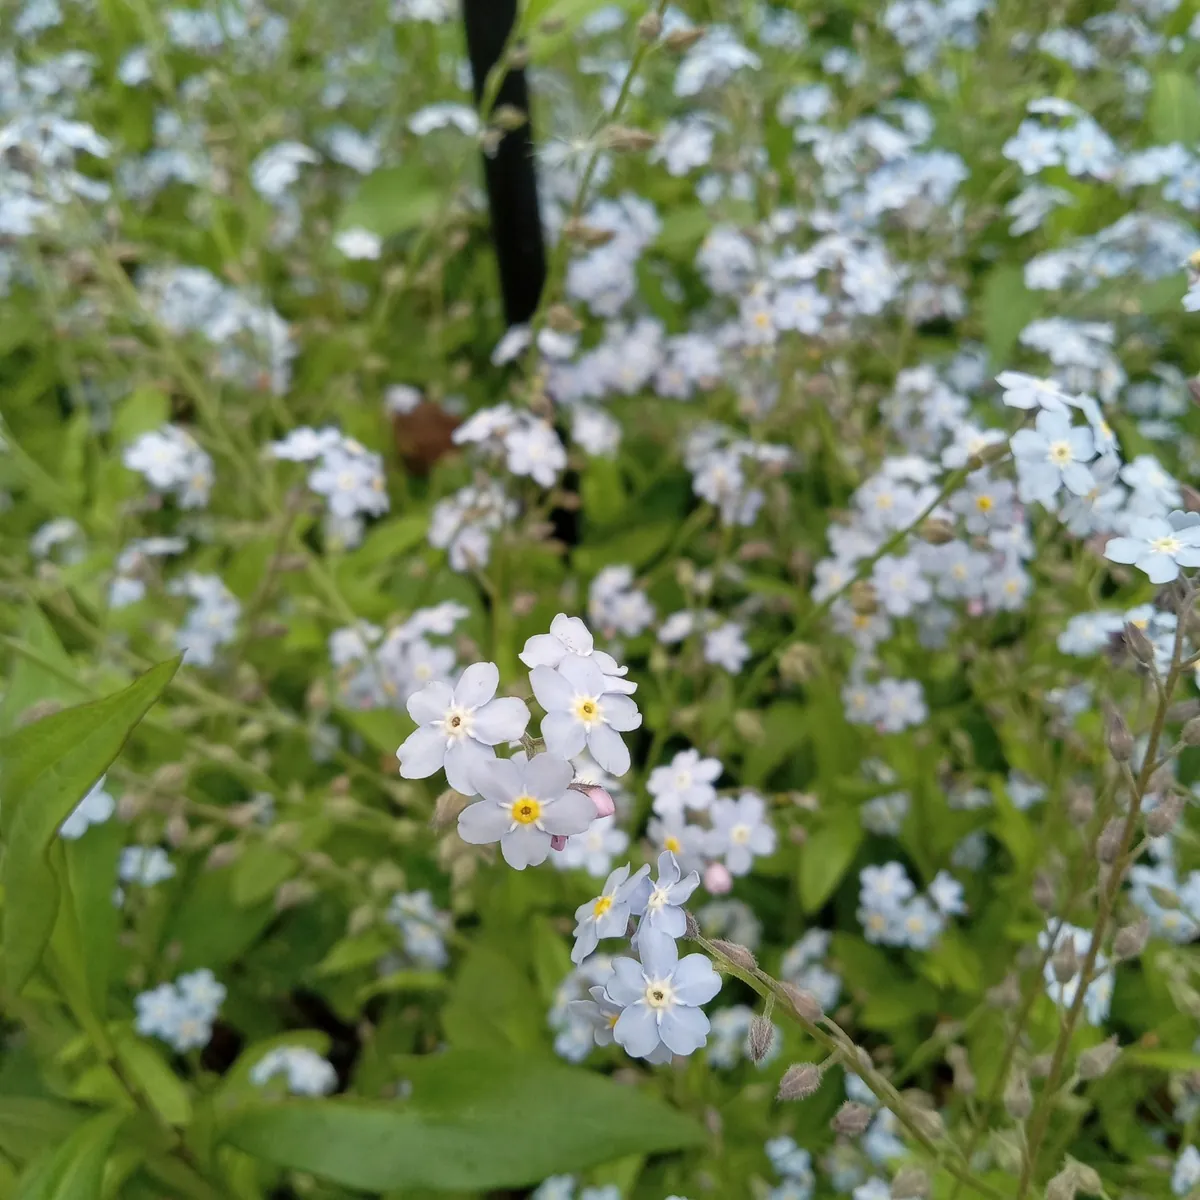 A colony of forget-me-nots, a small flowering plants with its flowers characterized by five light-blue petals and a yellow pistils.